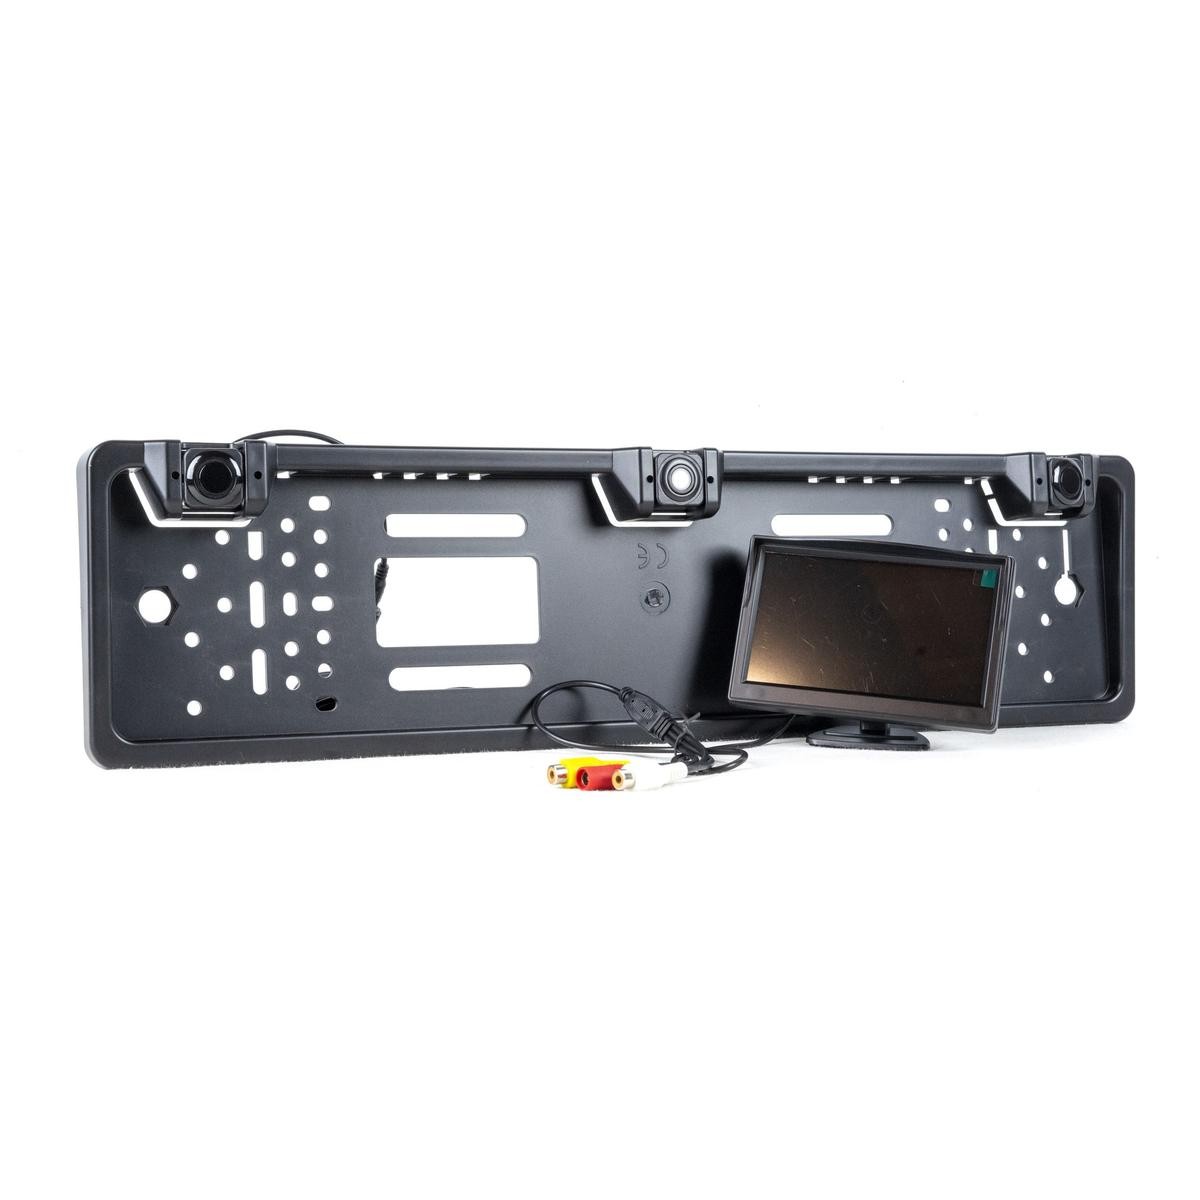 EINPARTS EPP034 Car reverse camera VW TOURAN (1T3) night vision, with monitor, with sensor